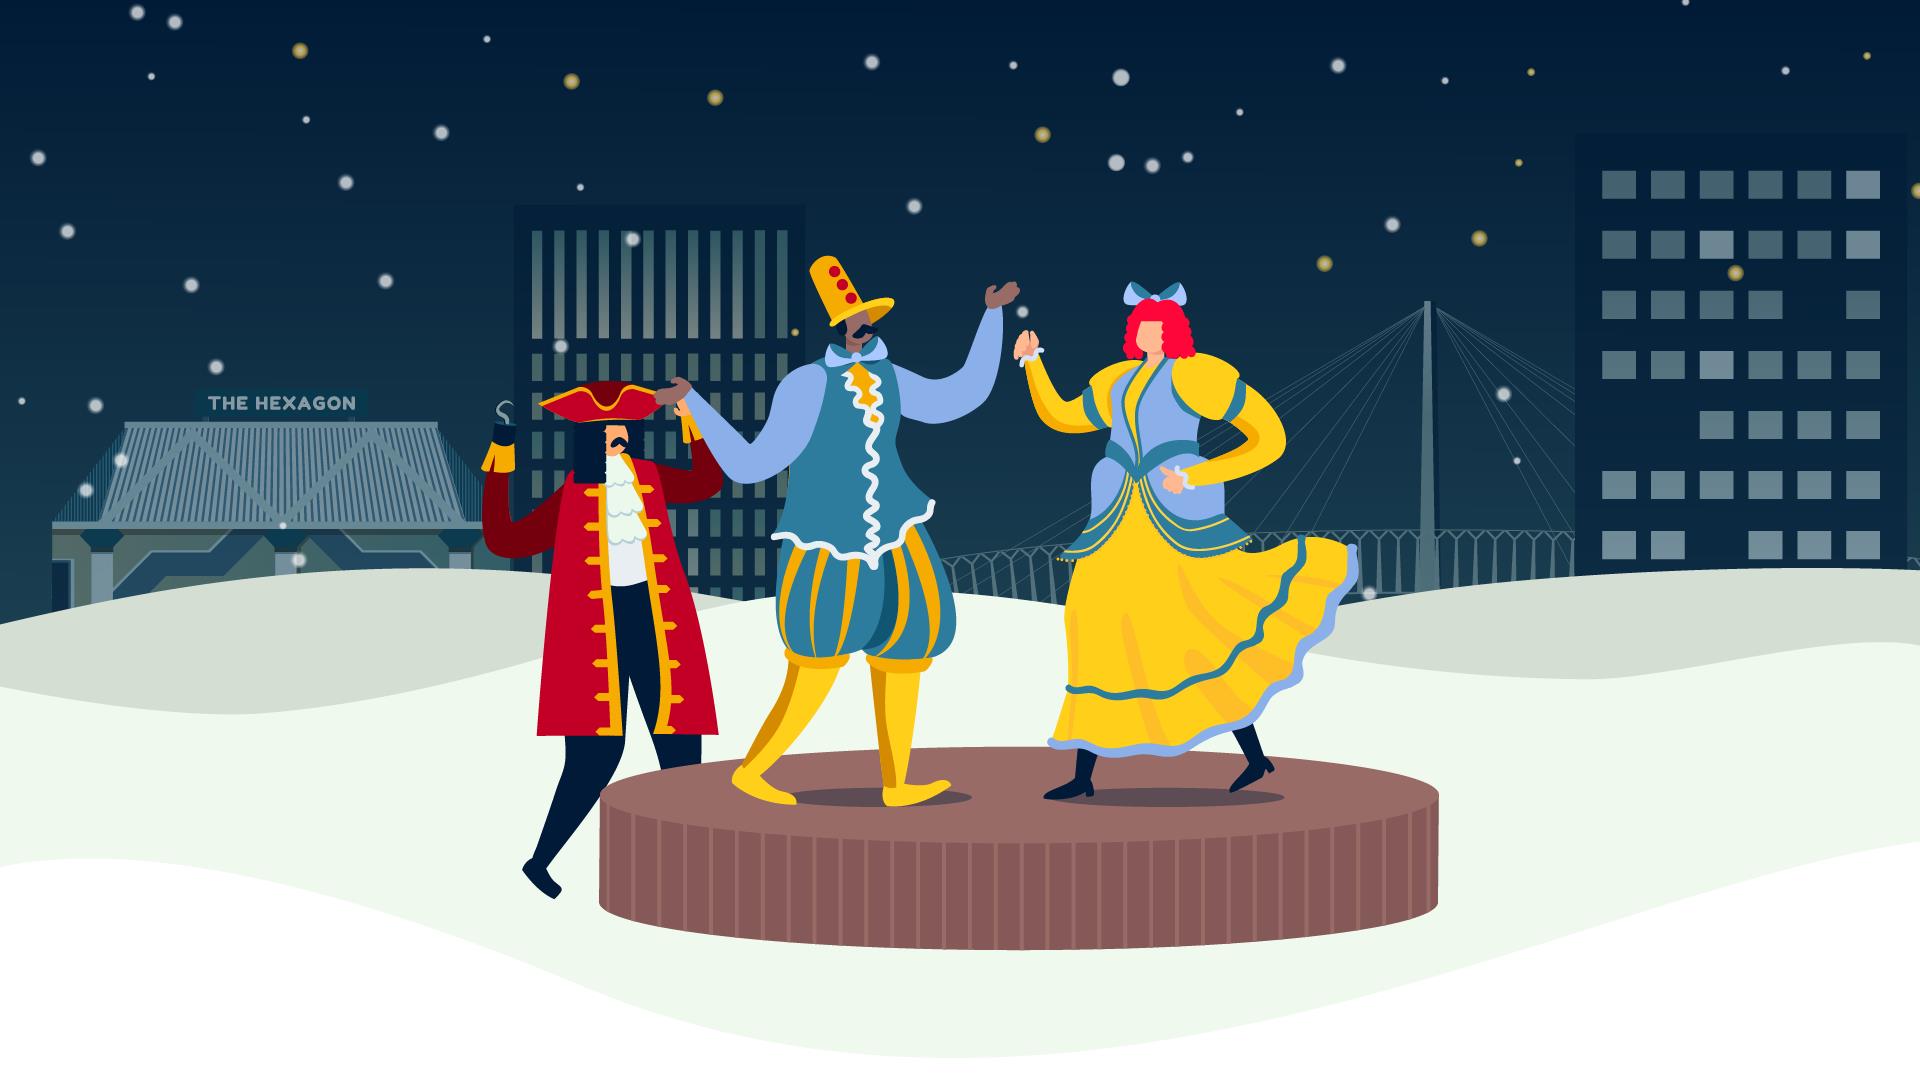 Illustrated Christmas scene showing pantomime characters in Reading